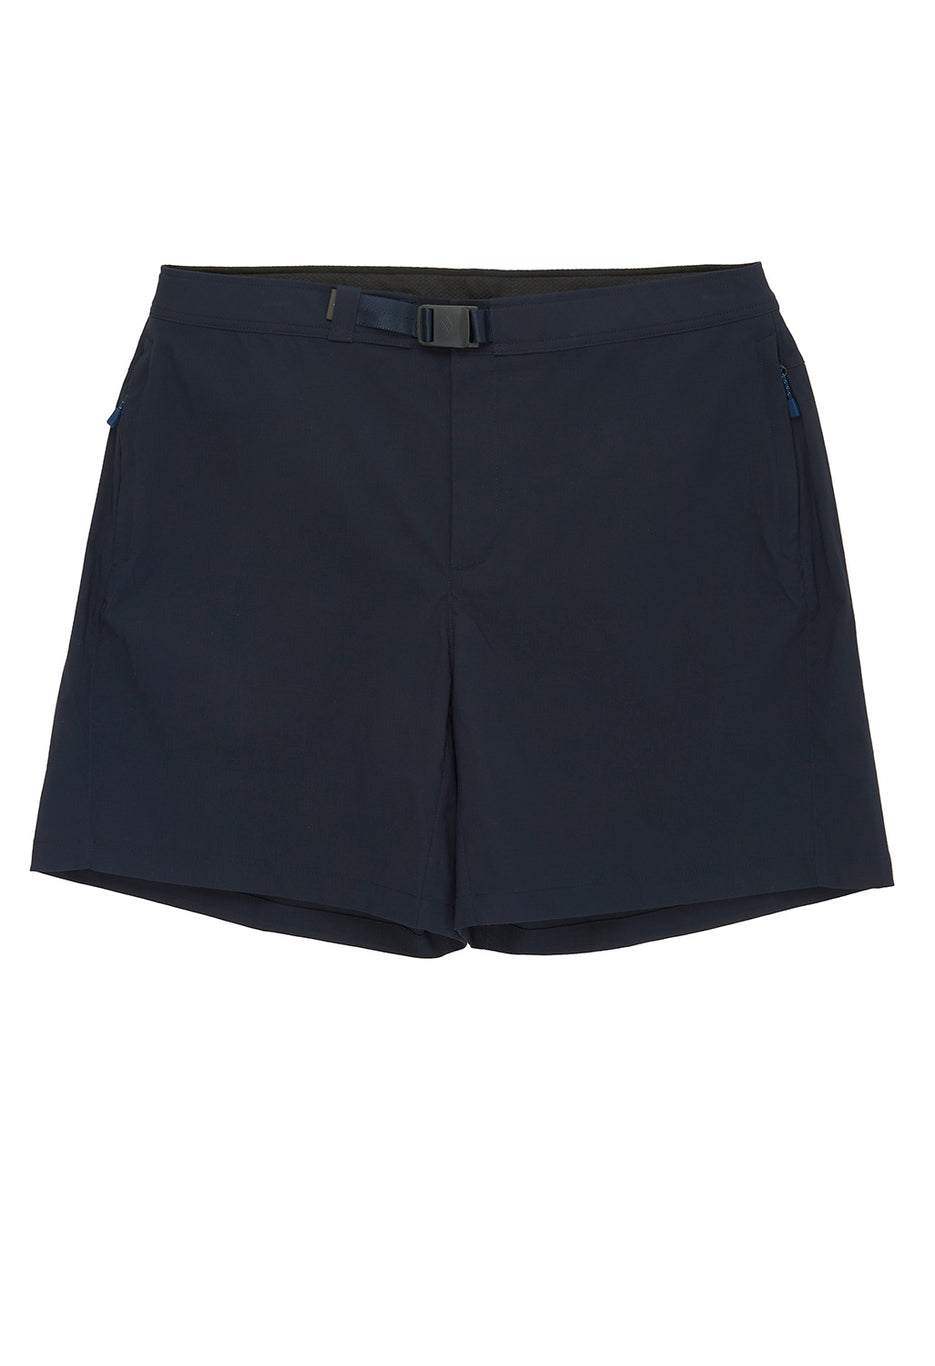 Montbell Women's Canyon Shorts - Navy